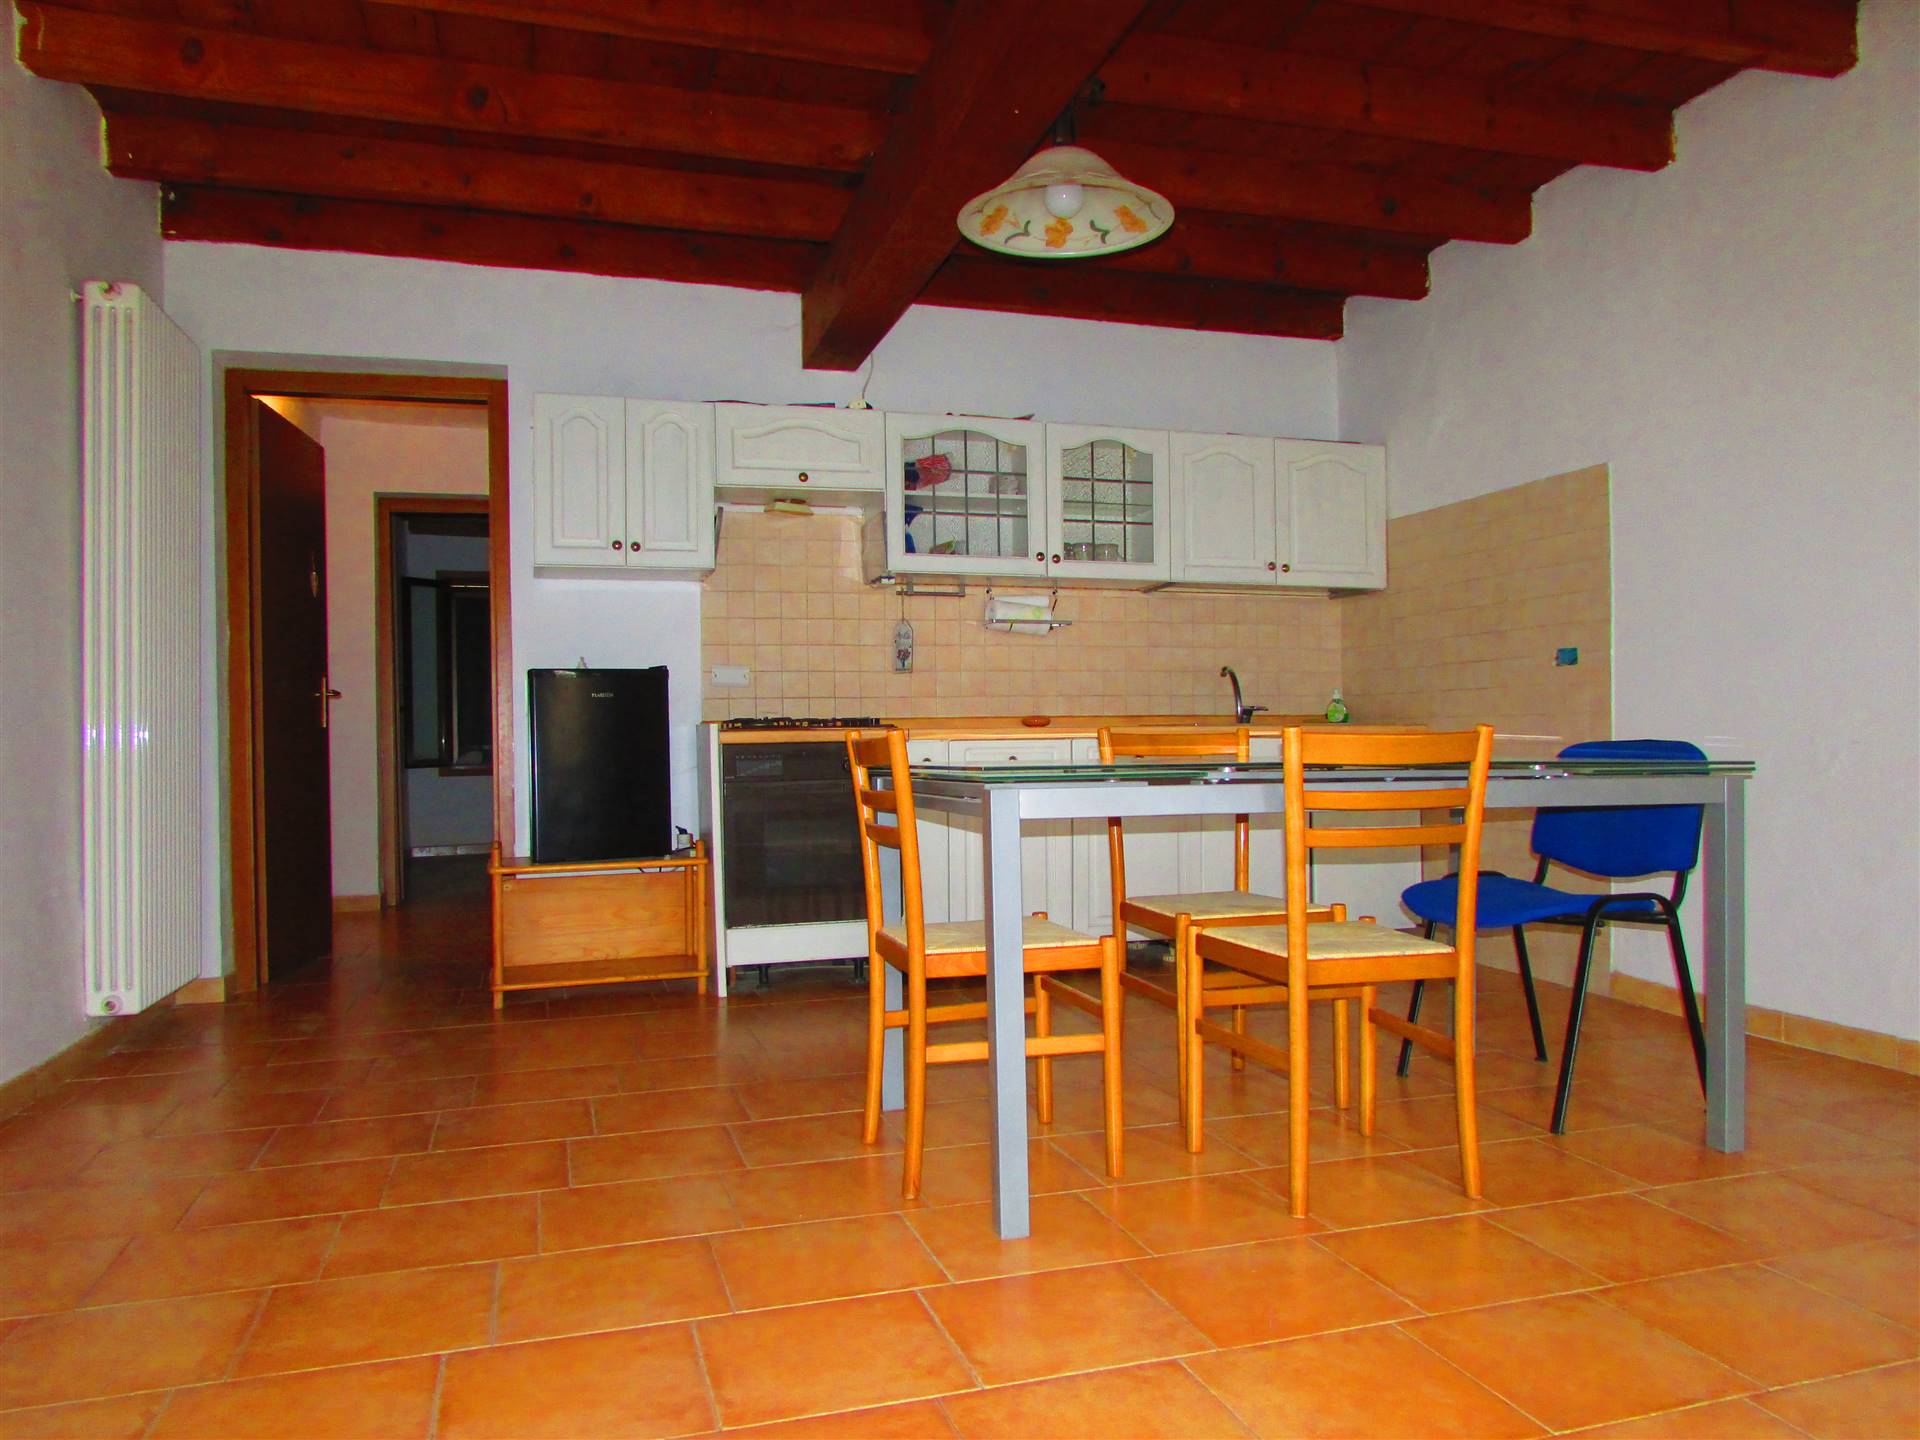 SAN GREGORIO, VERONELLA, Terraced villa for sale of 165 Sq. mt., Good condition, Heating Individual heating system, Energetic class: F, composed by: 